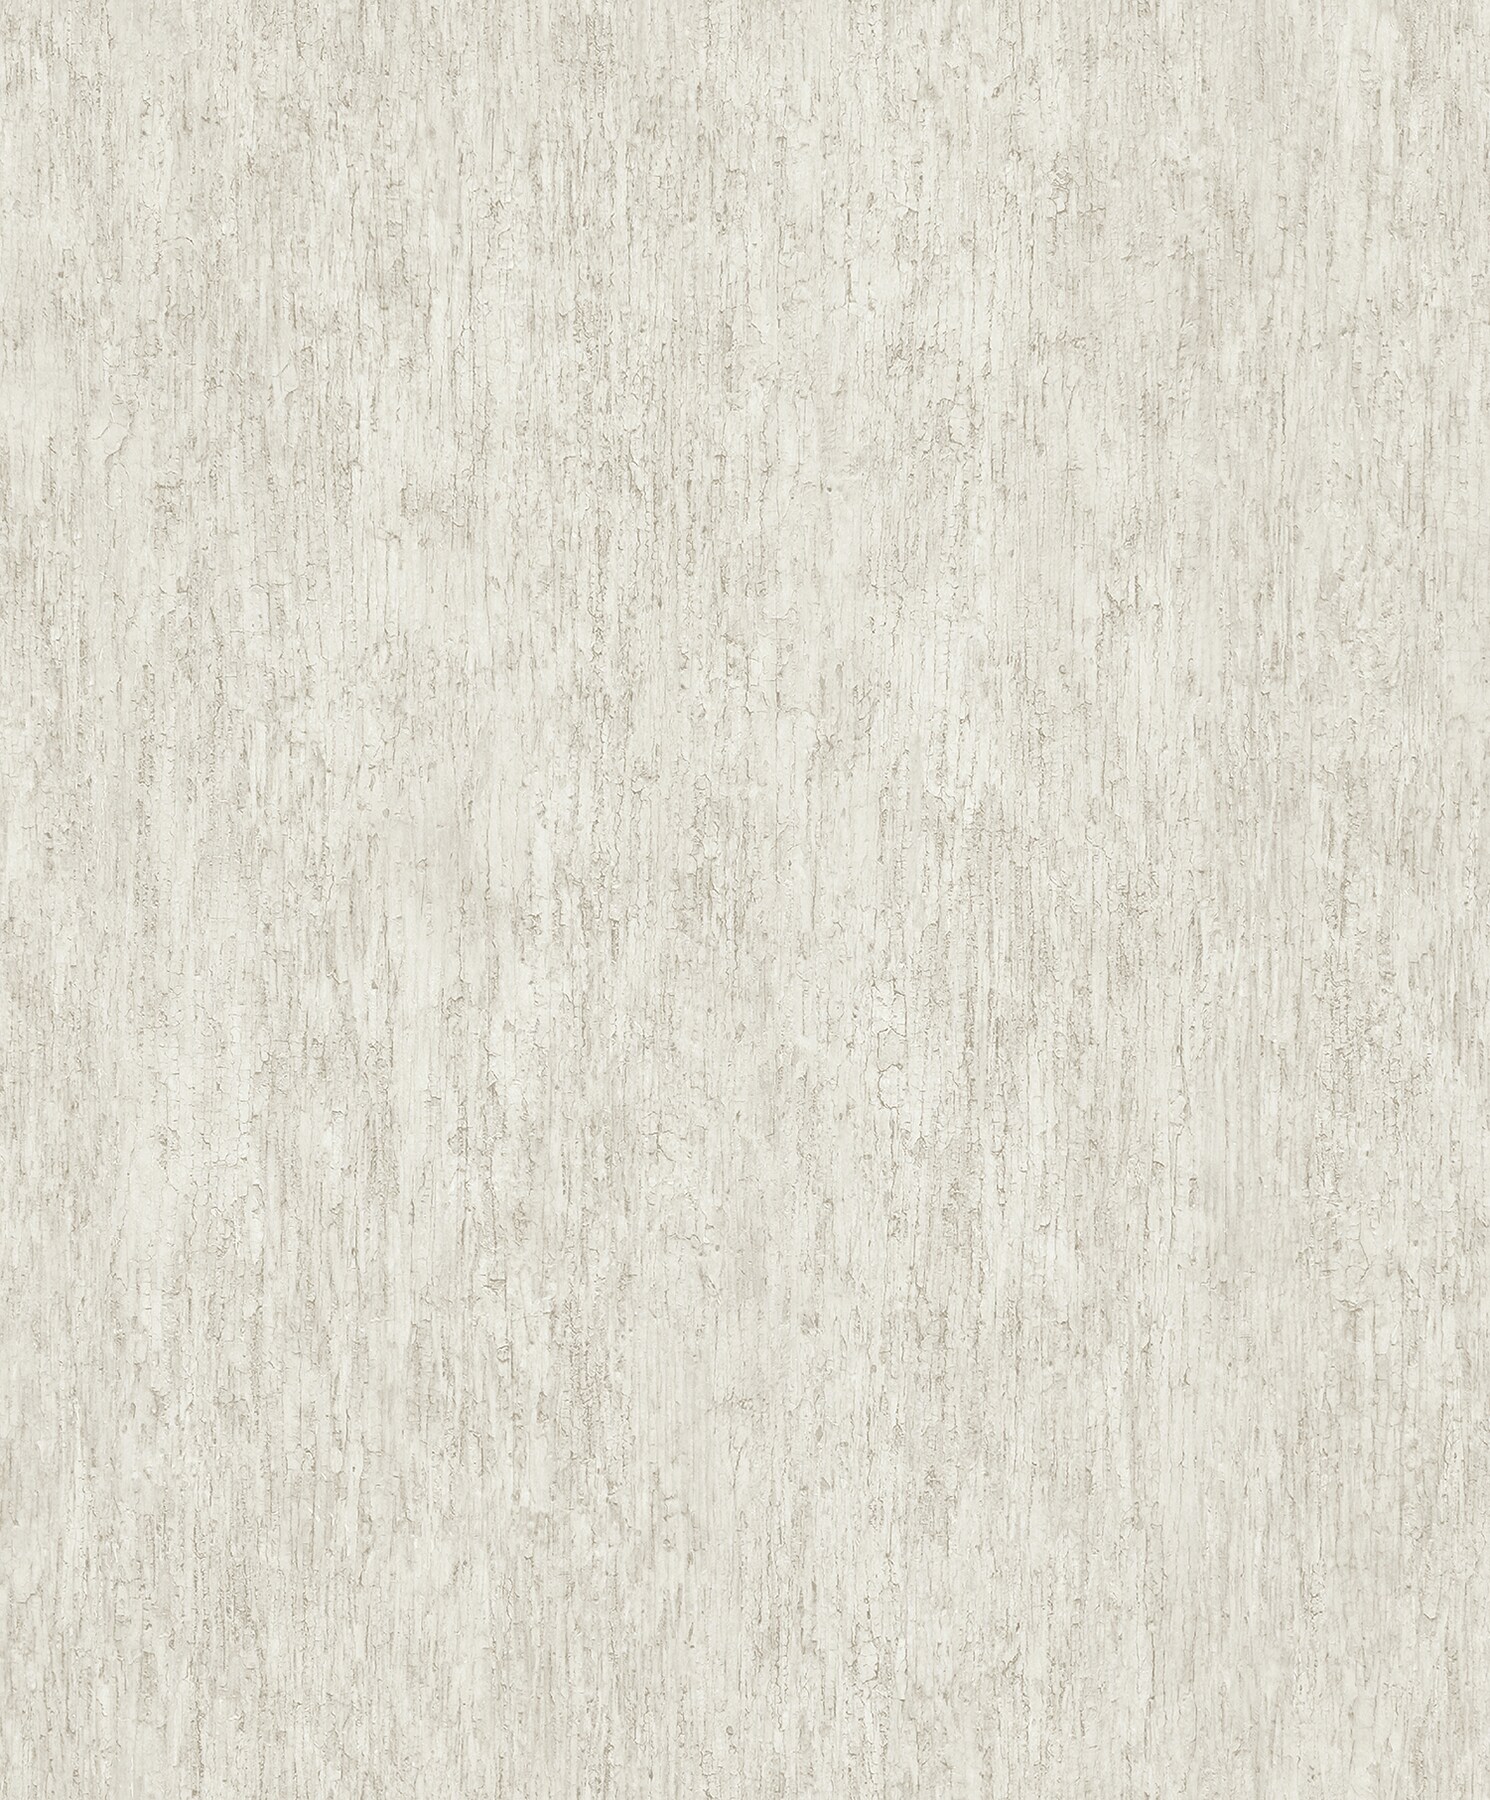 Advantage Geo and Textures 57.5-sq ft Taupe Non-woven Abstract Unpasted ...